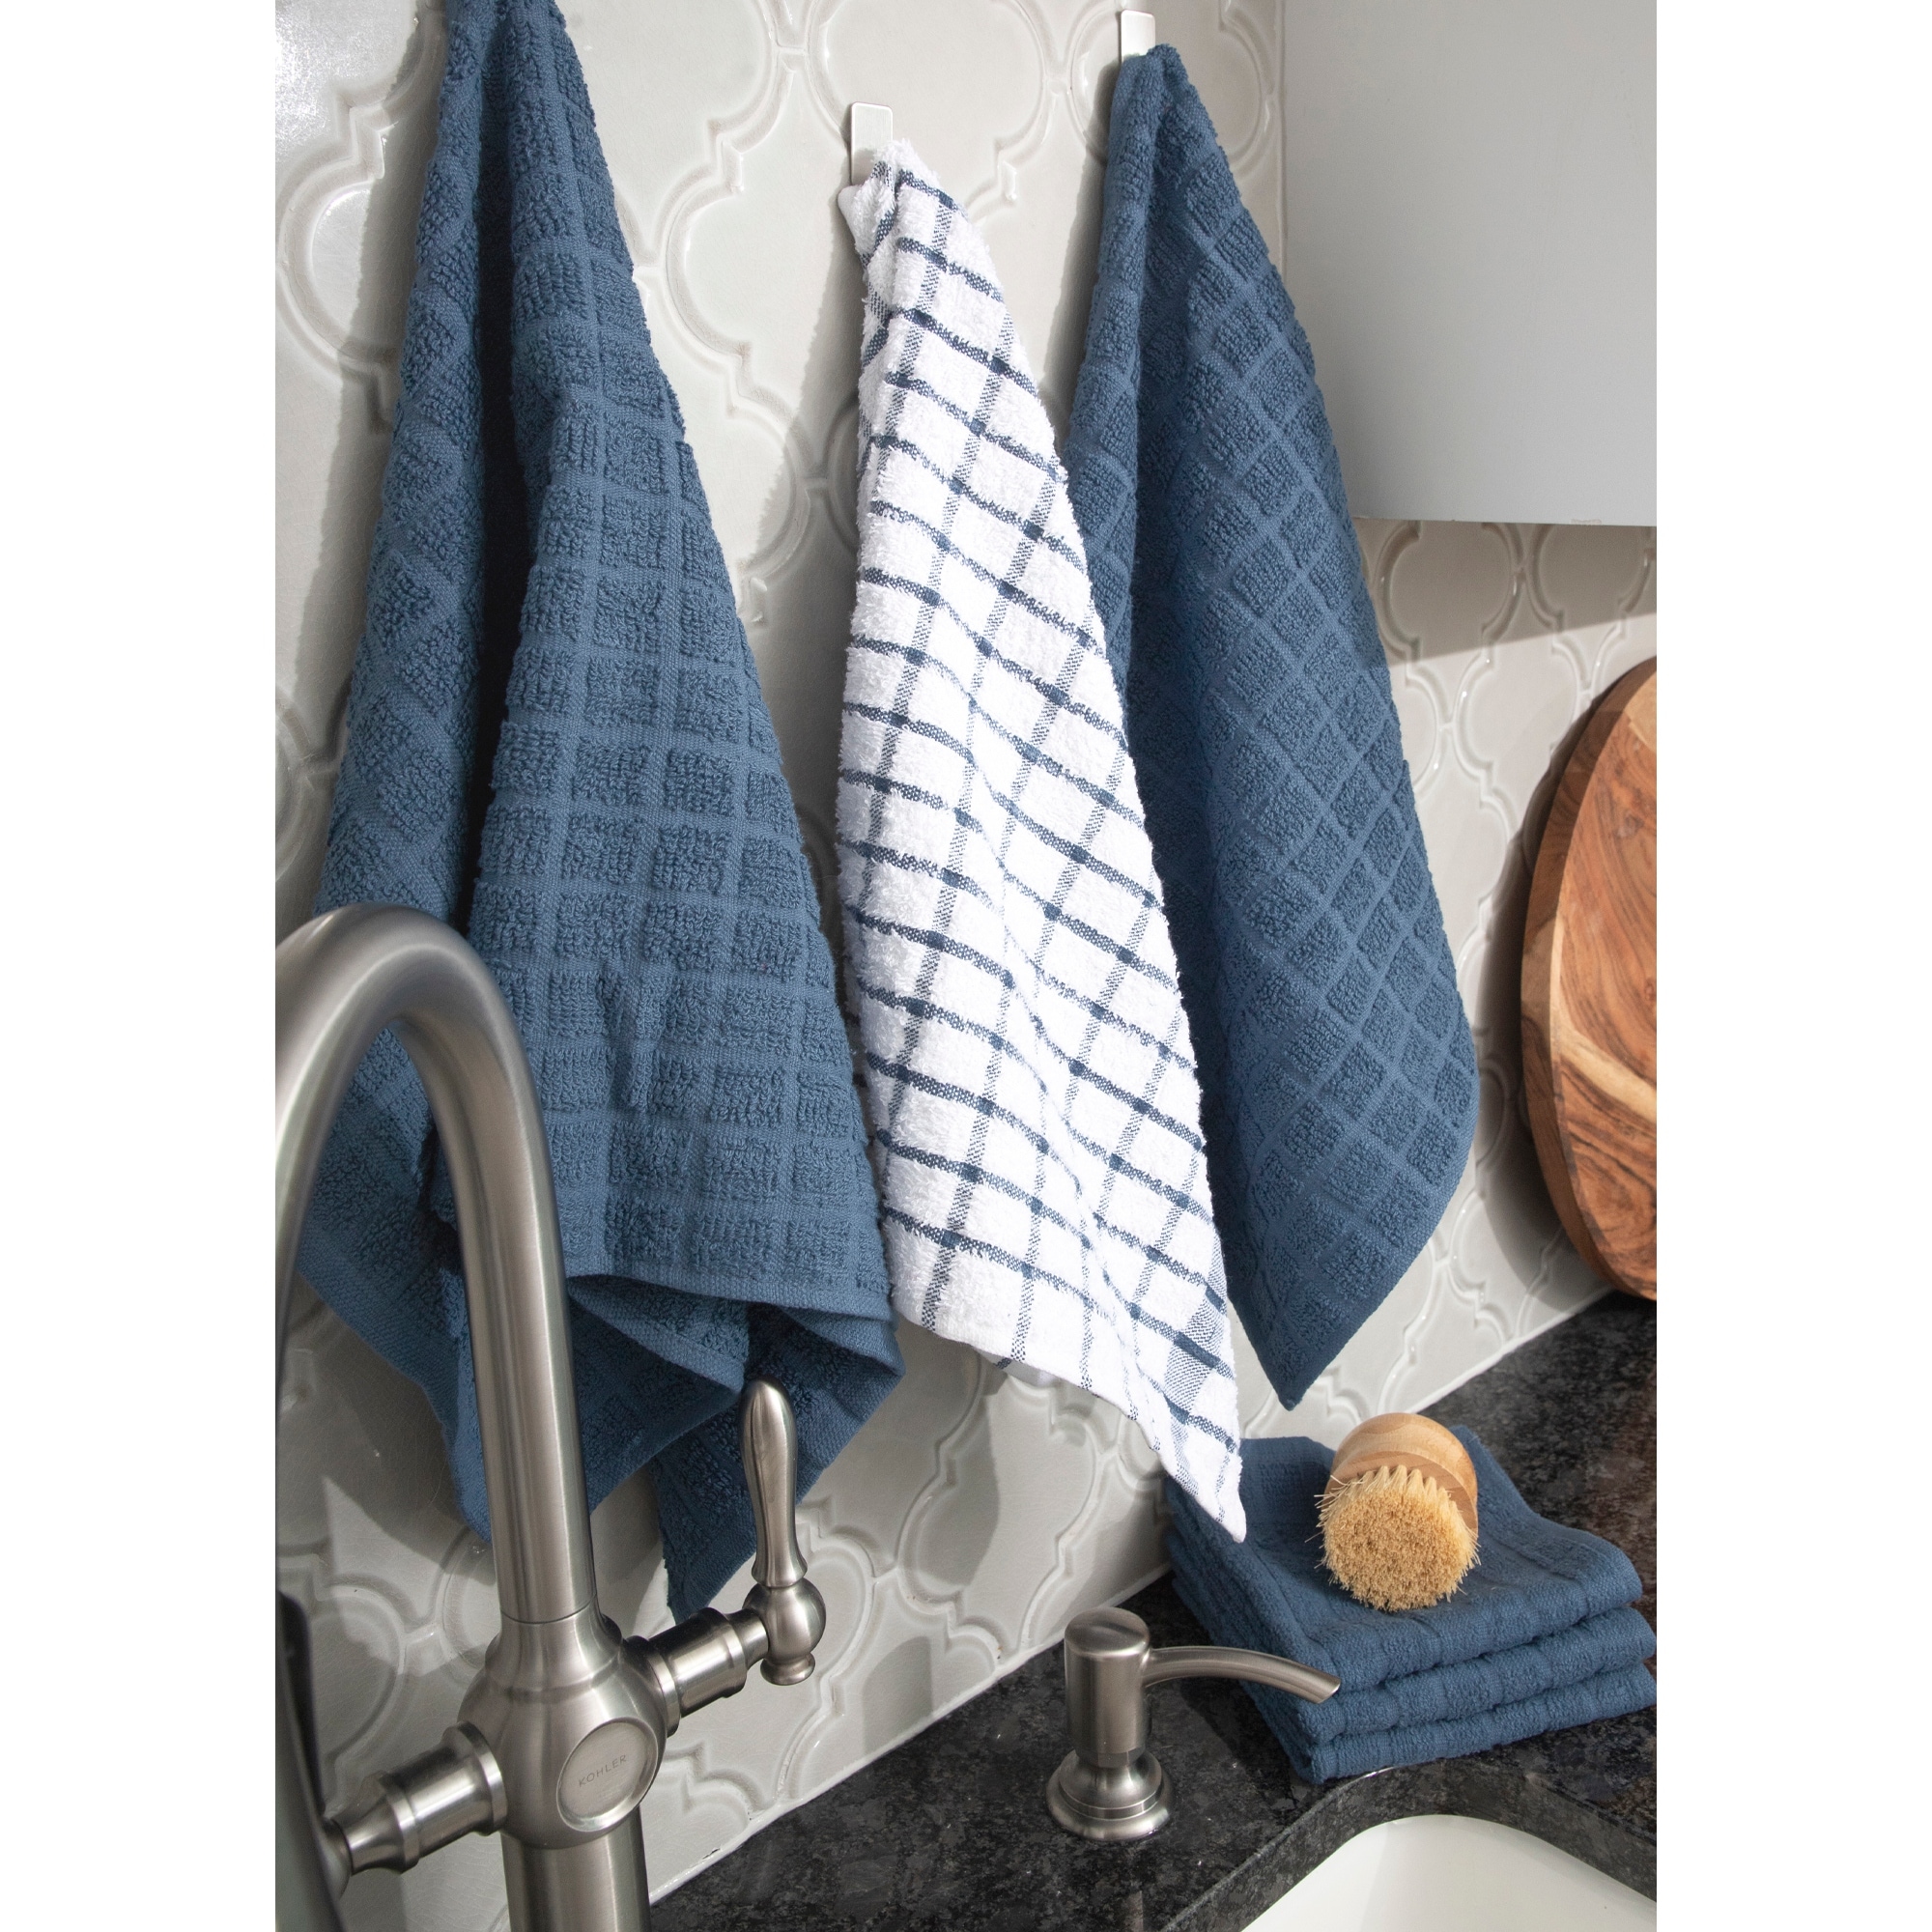 https://ak1.ostkcdn.com/images/products/is/images/direct/44d5a0e160e6d2258c85947bc3b26b800f60f8c1/RITZ-Terry-Kitchen-Towel-and-Dish-Cloth%2C-Set-of-3-Towels-and-3-Dish-Cloths.jpg